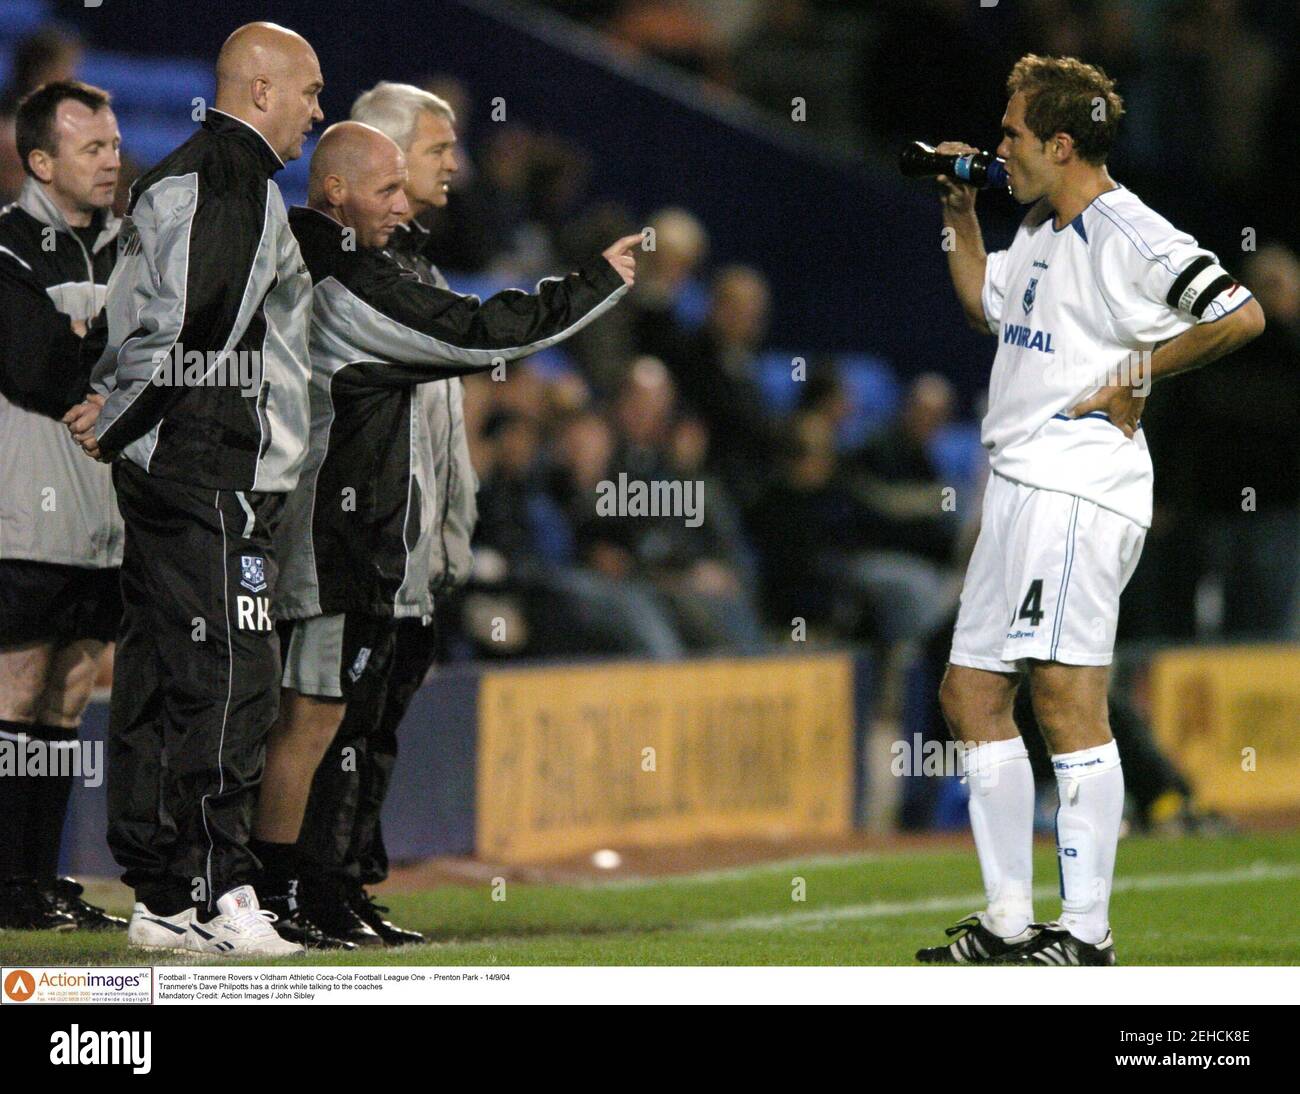 Football - Tranmere Rovers v Oldham Athletic Coca-Cola Football League One  - Prenton Park - 14/9/04  Tranmere's Dave Philpotts has a drink while talking to the coaches  Mandatory Credit: Action Images / John Sibley  04/05 Stock Photo